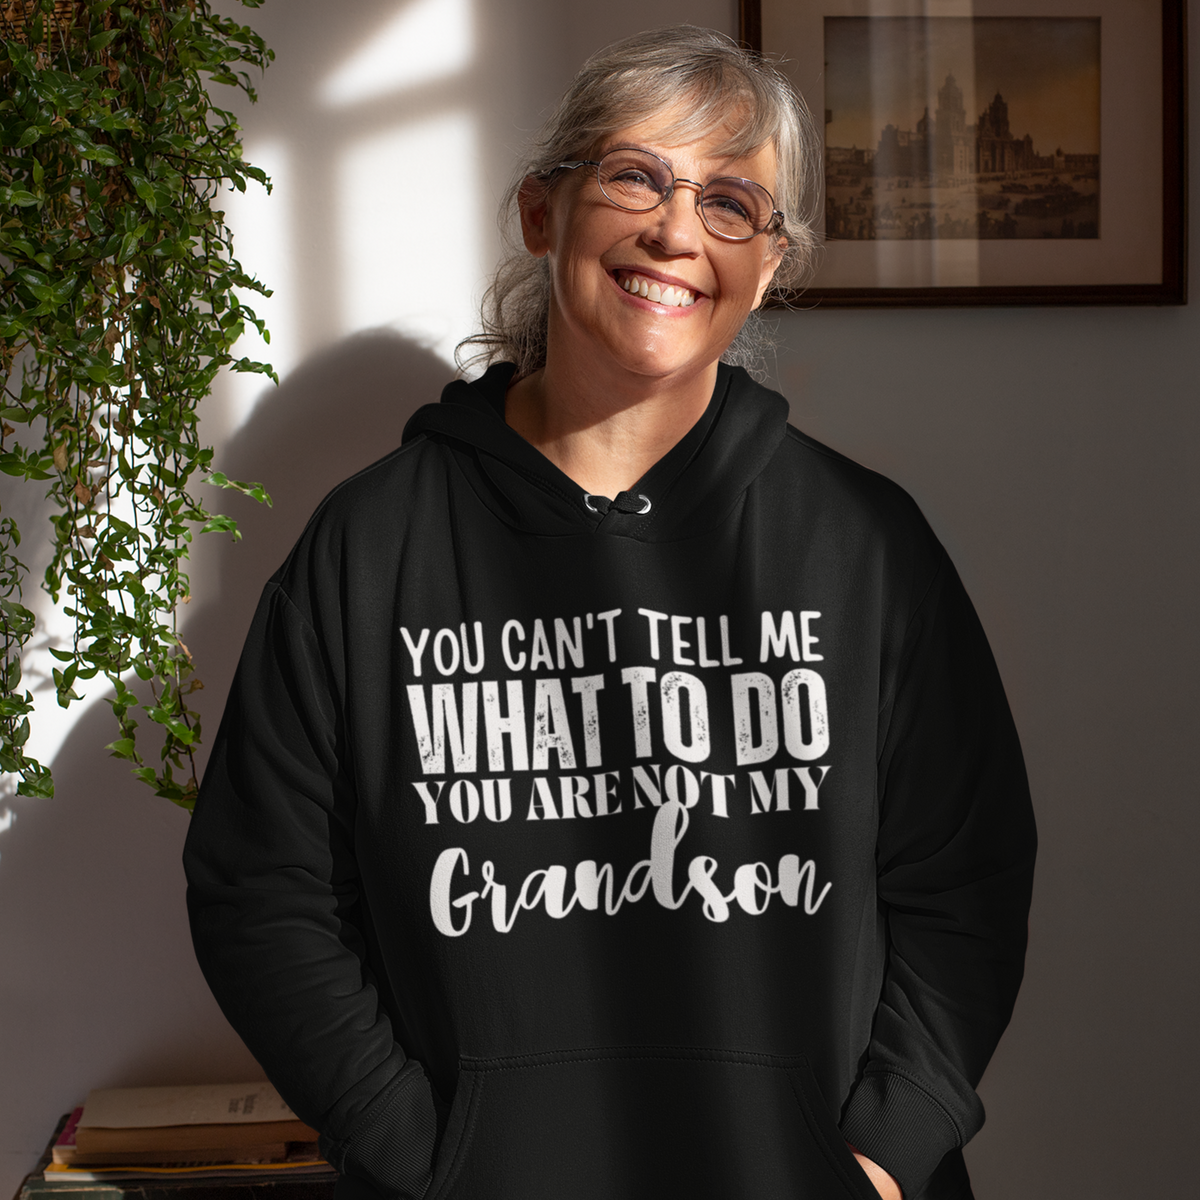 You can't tell me what to do you are not my son, hoodie, gift for grandmom, gift for granddad, funny grandparents apparel, funny granddad shirt, funny grandmom shirt, granddad hoodie, grnadmom hoodie, parenthood apparel, funny tshirt, sarcastic tee, fathers day gift, mothers day gift